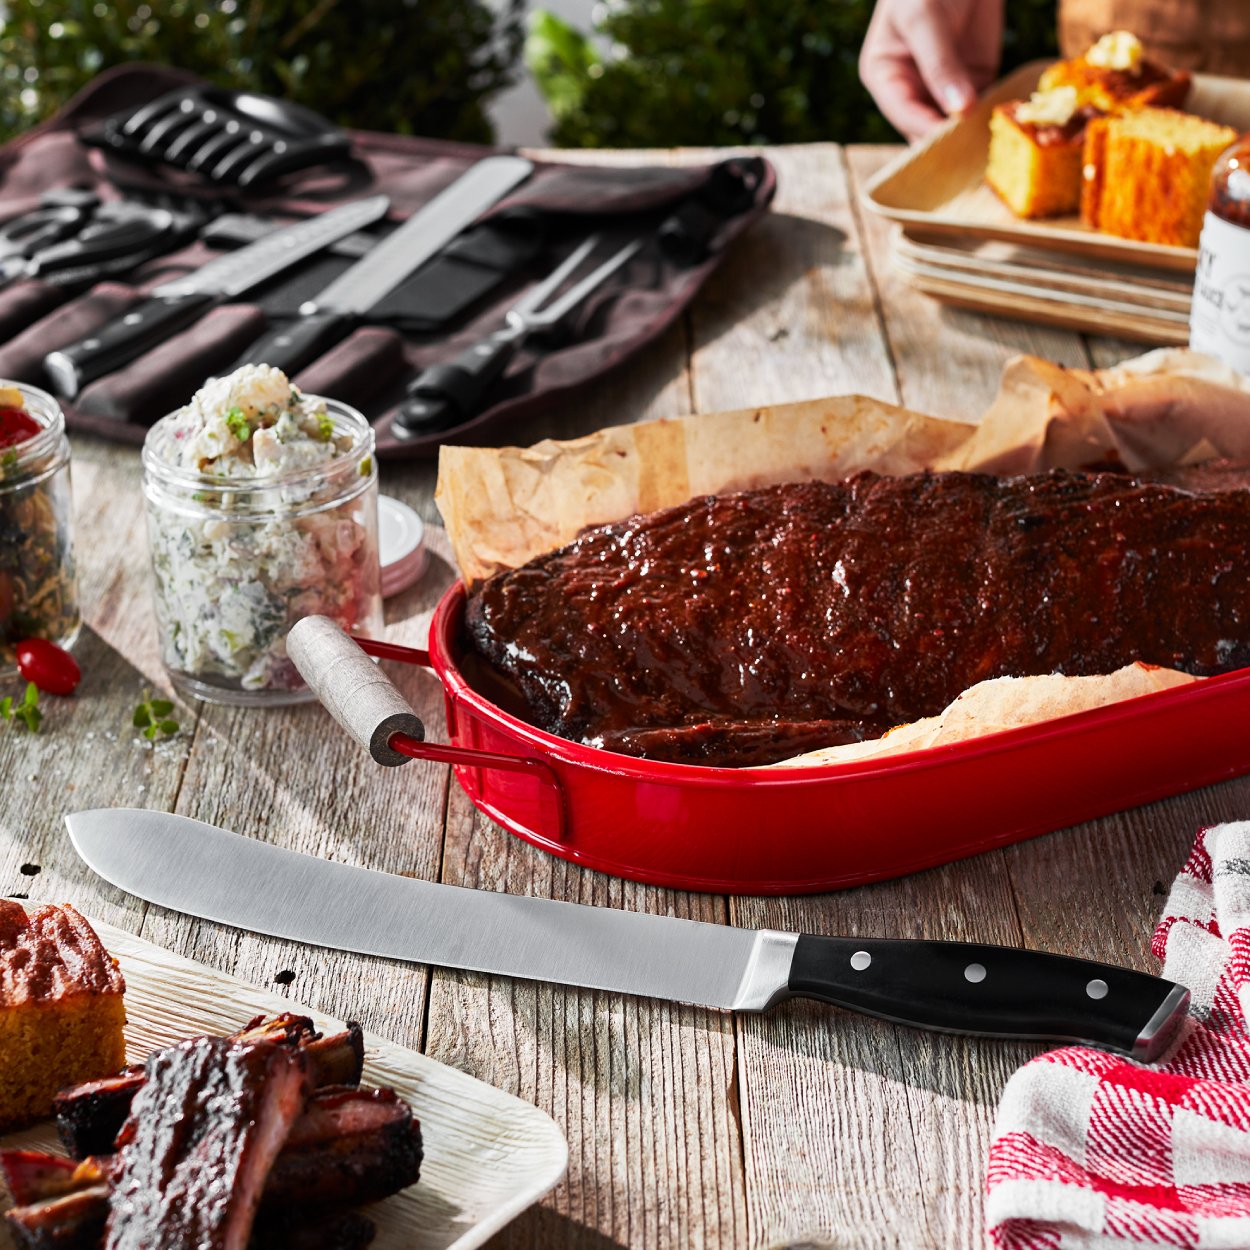 https://www.zwilling.com/on/demandware.static/-/Sites-zwilling-us-Library/default/dwf0328b2c/images/product-content/masonry-content/henckels/cutlery/BBQTools_Mason_Comp_Masonry_600x600_Ribs.jpg